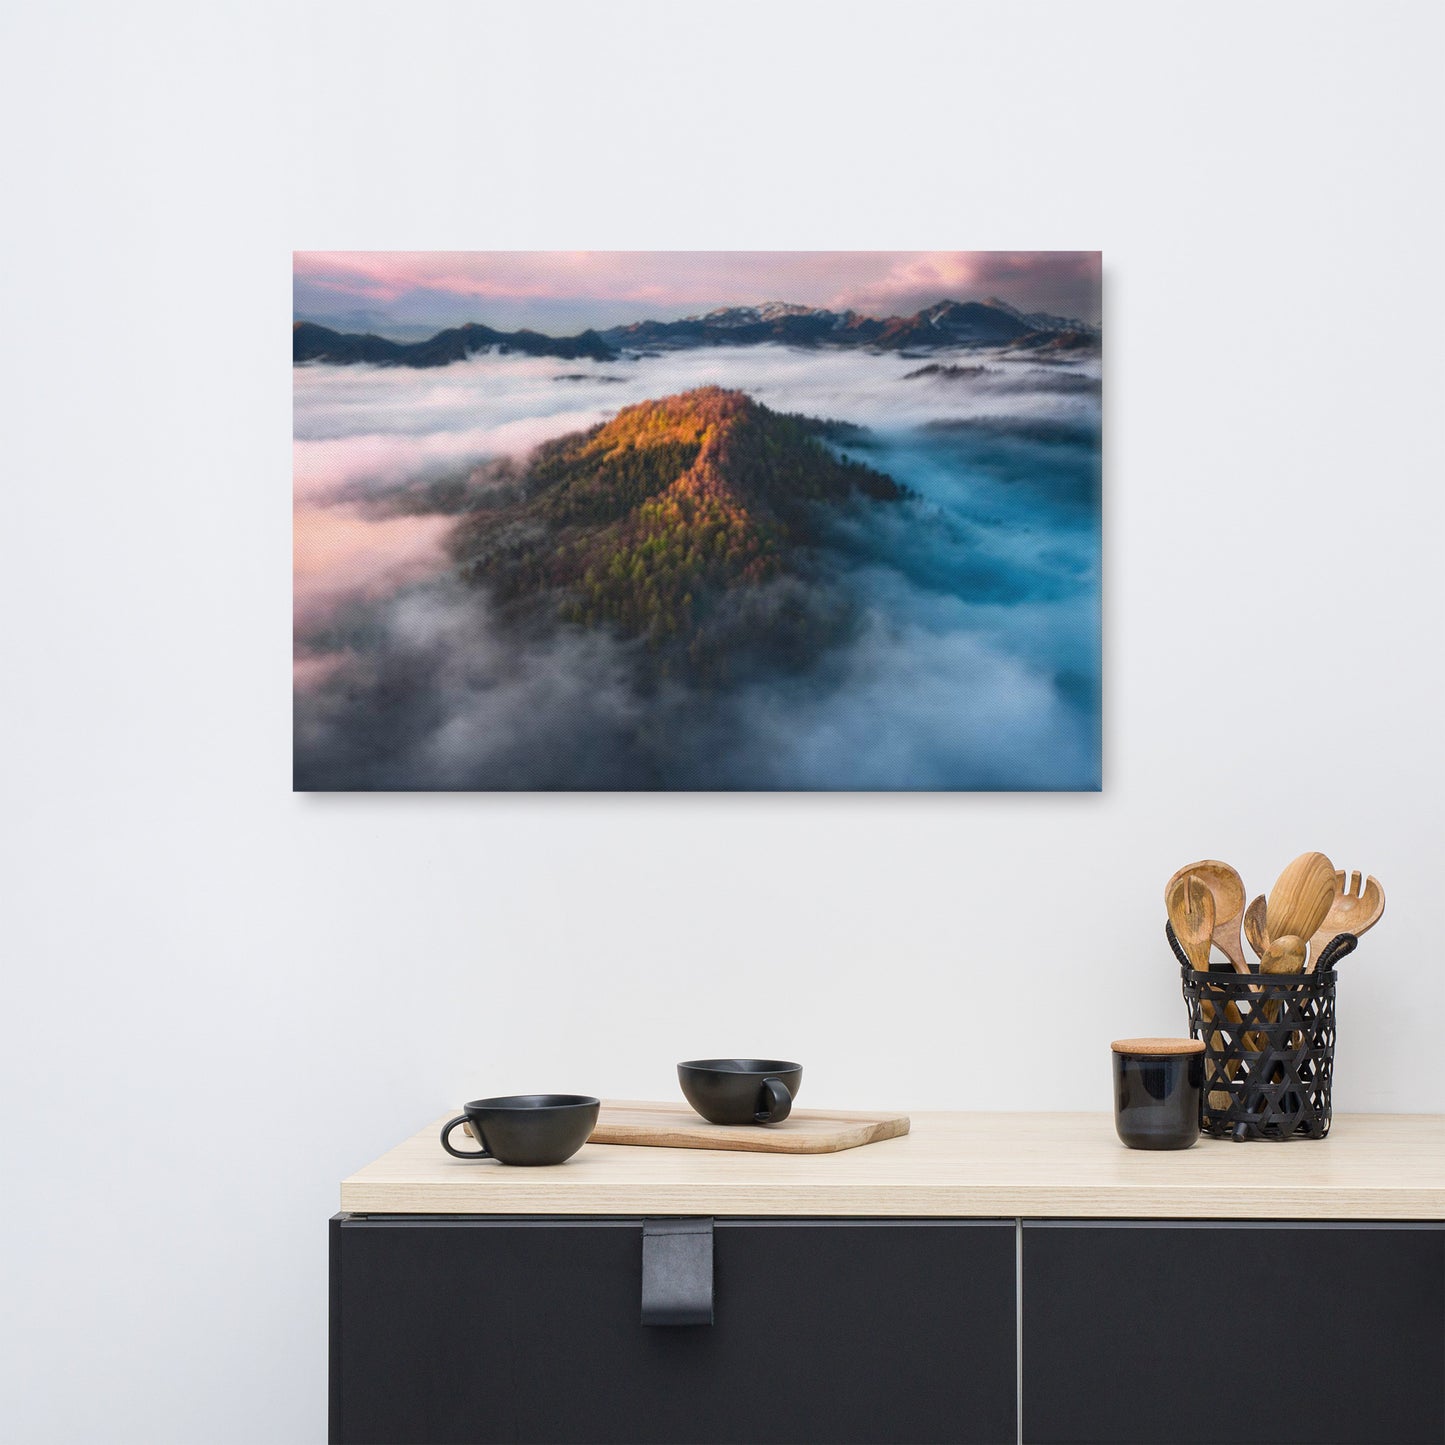 The Mystery of the Mist Rustic Landscape Photograph Canvas Wall Art Print